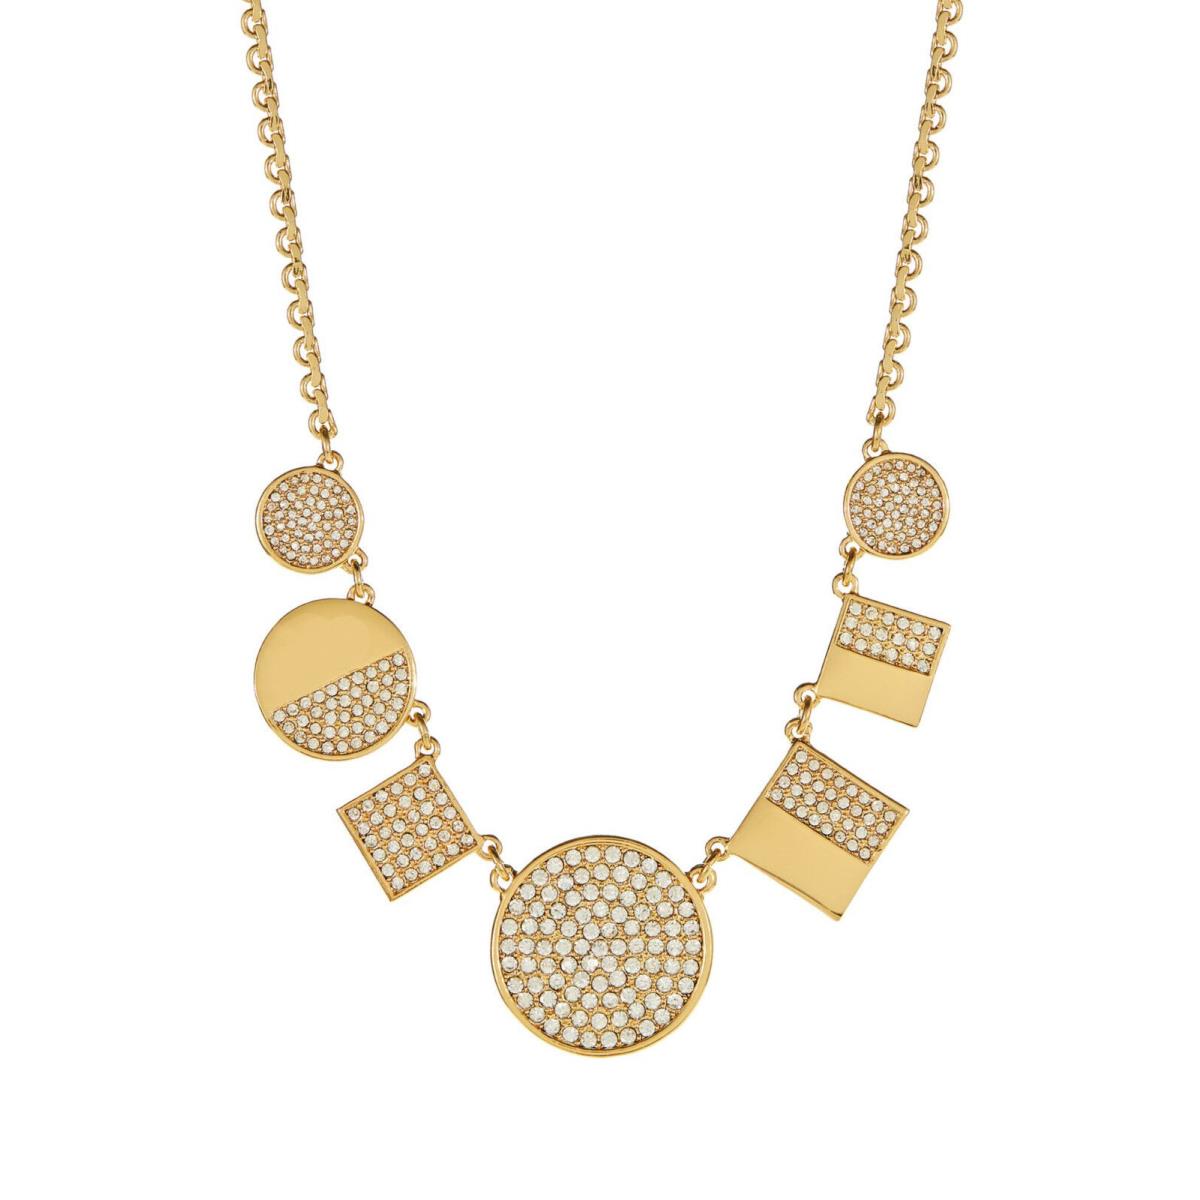 Kate Spade N.y. Pave Frontal Necklace in Gold Plated